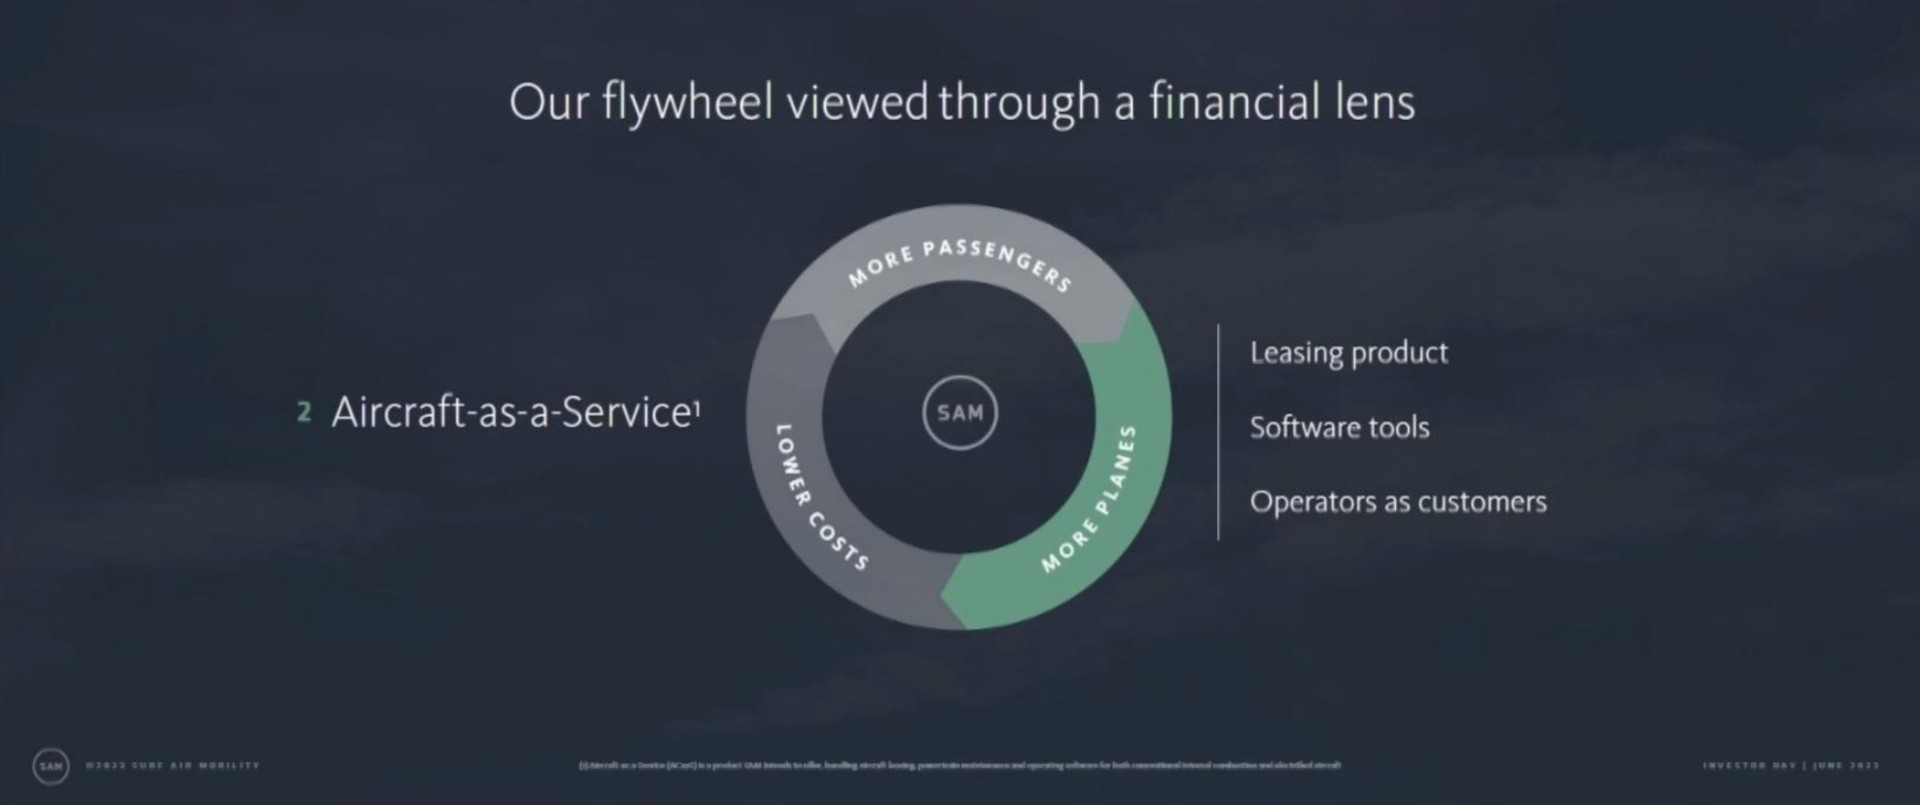 our flywheel viewed through a financial lens aircraft as a service am leasing product tools operators as customers | Surf Air